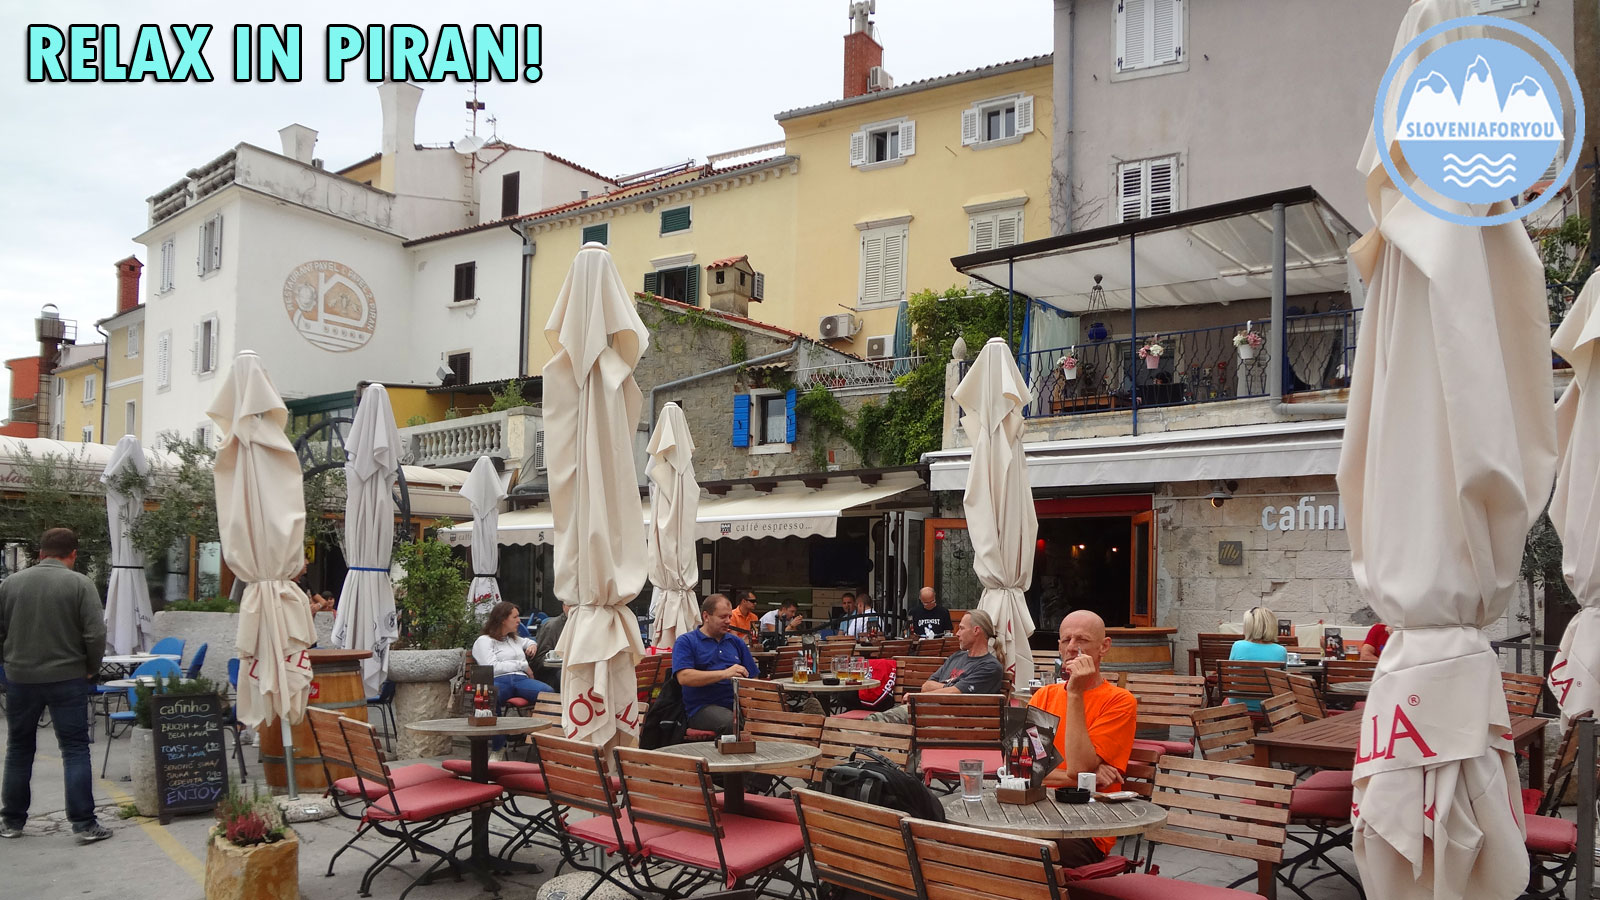 Relaxing at a cafe by the sea, Piran, Sloveniaforyou